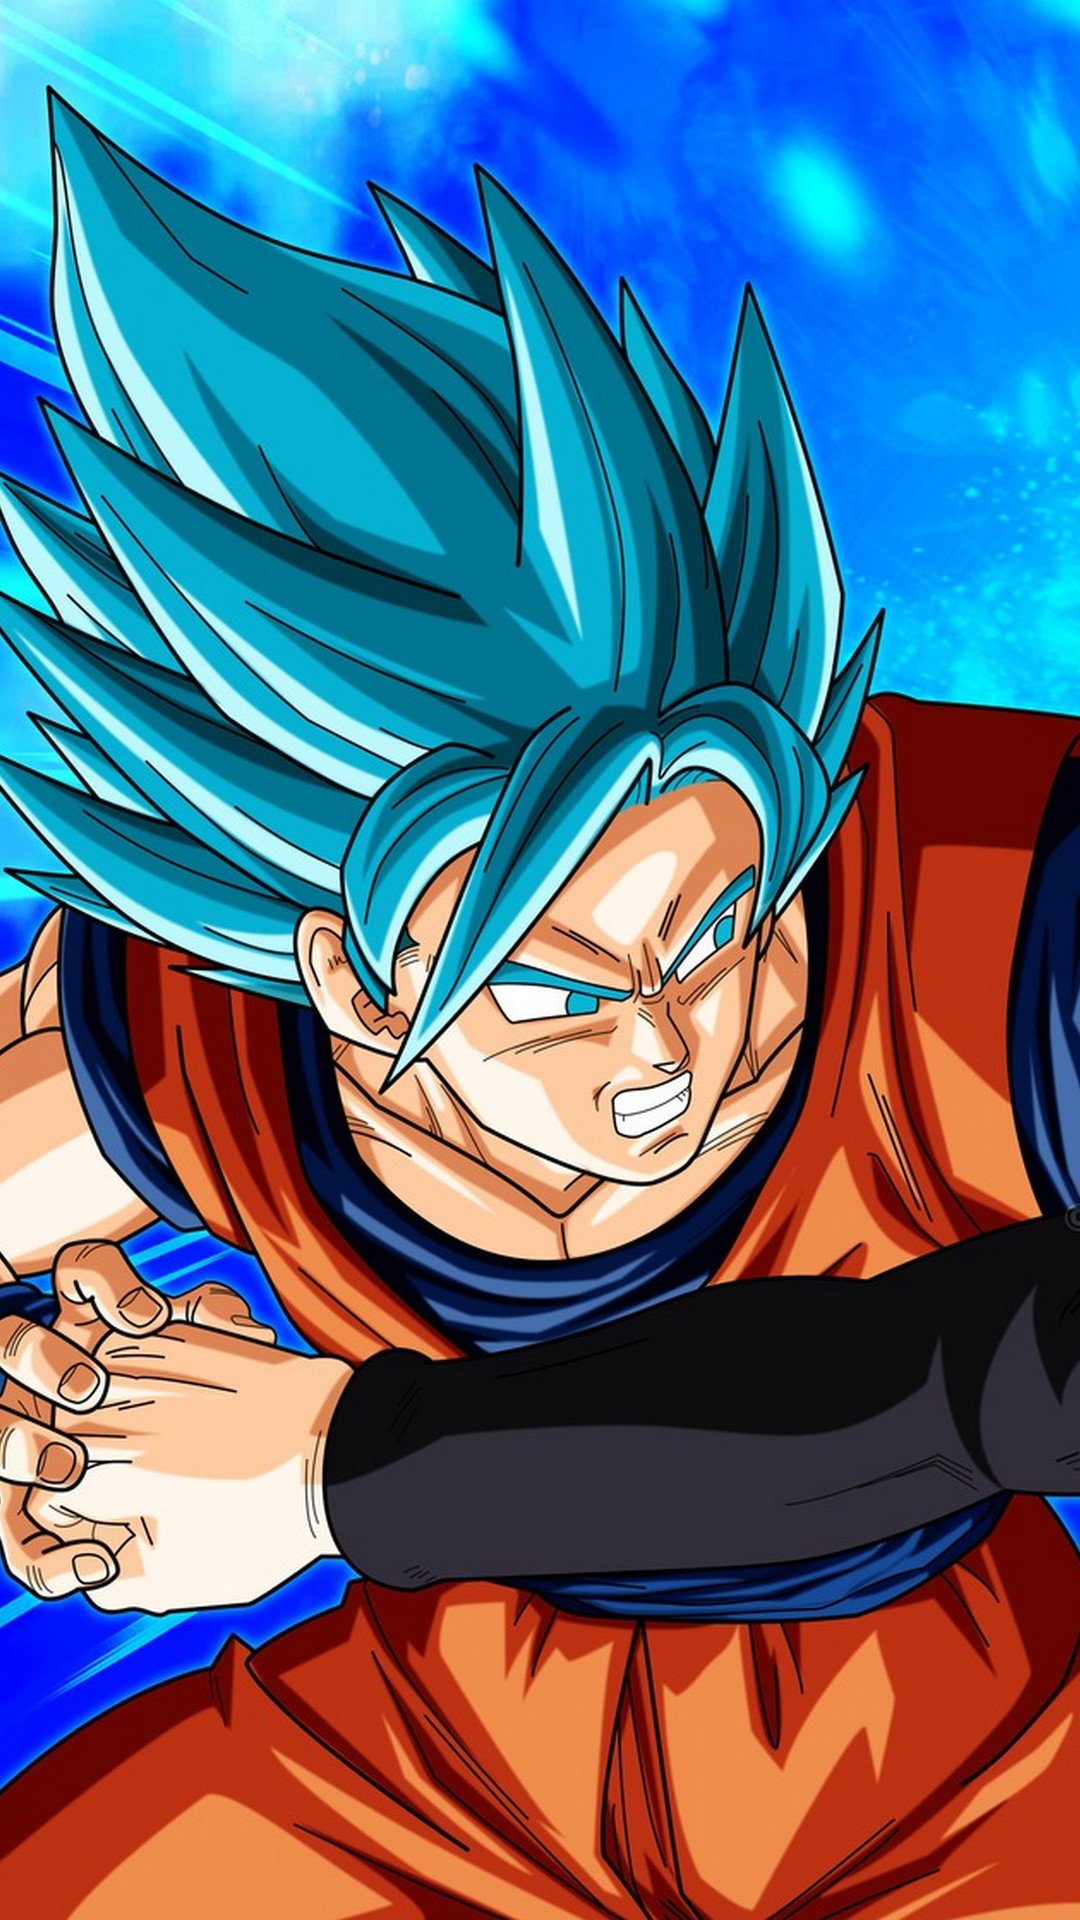 Goku SSJ Blue Backgrounds For Android with HD resolution 1080x1920